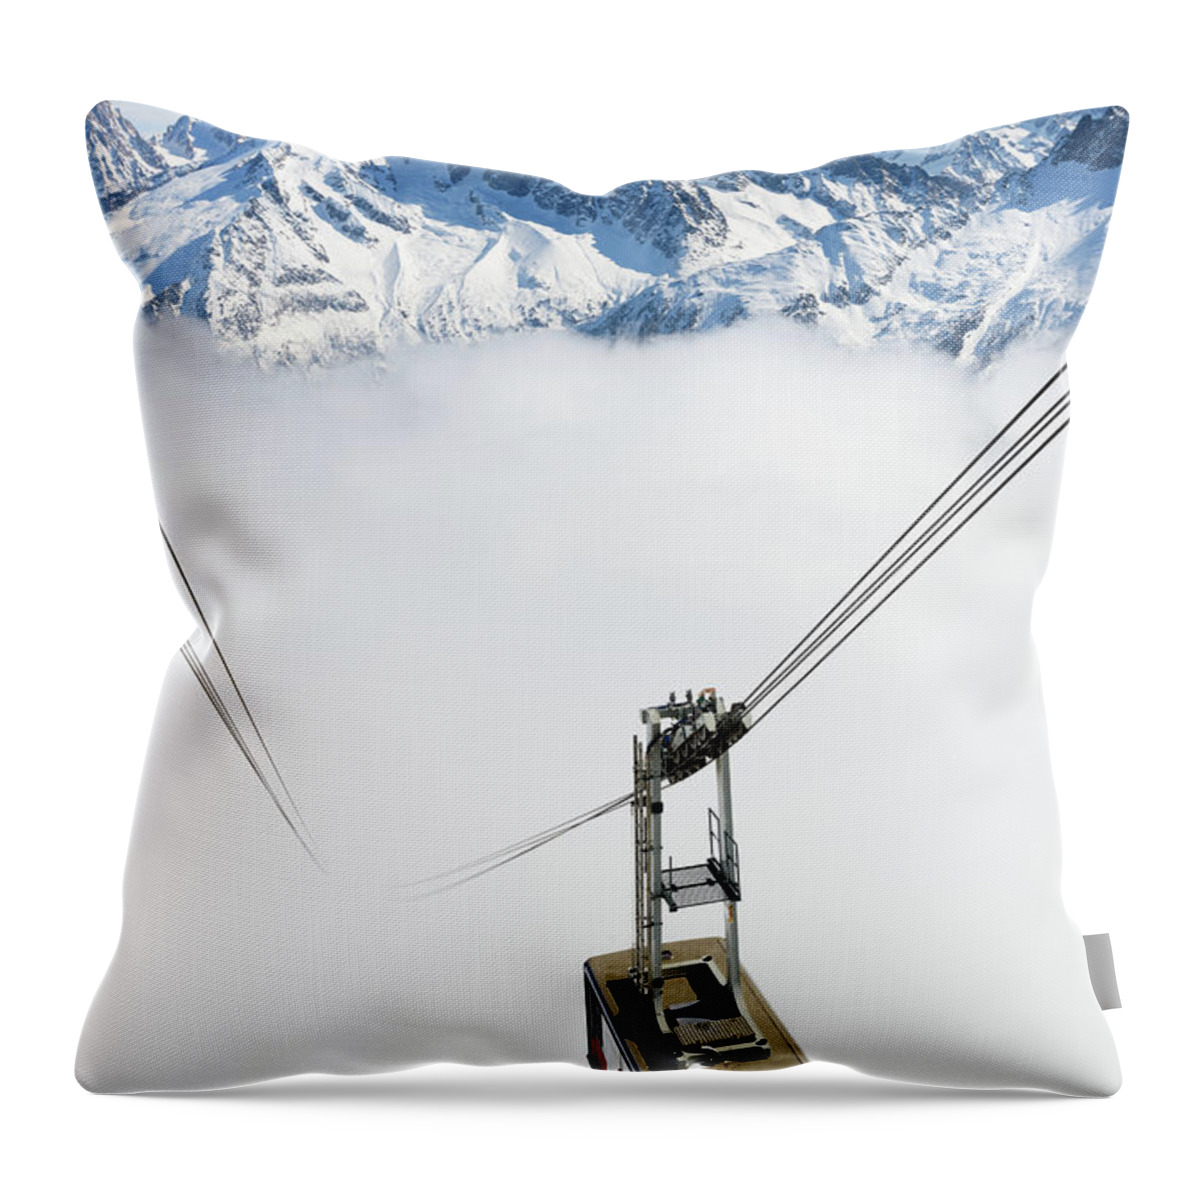 Scenics Throw Pillow featuring the photograph A Cable Car Traveling Up A Snowy by Alexsava